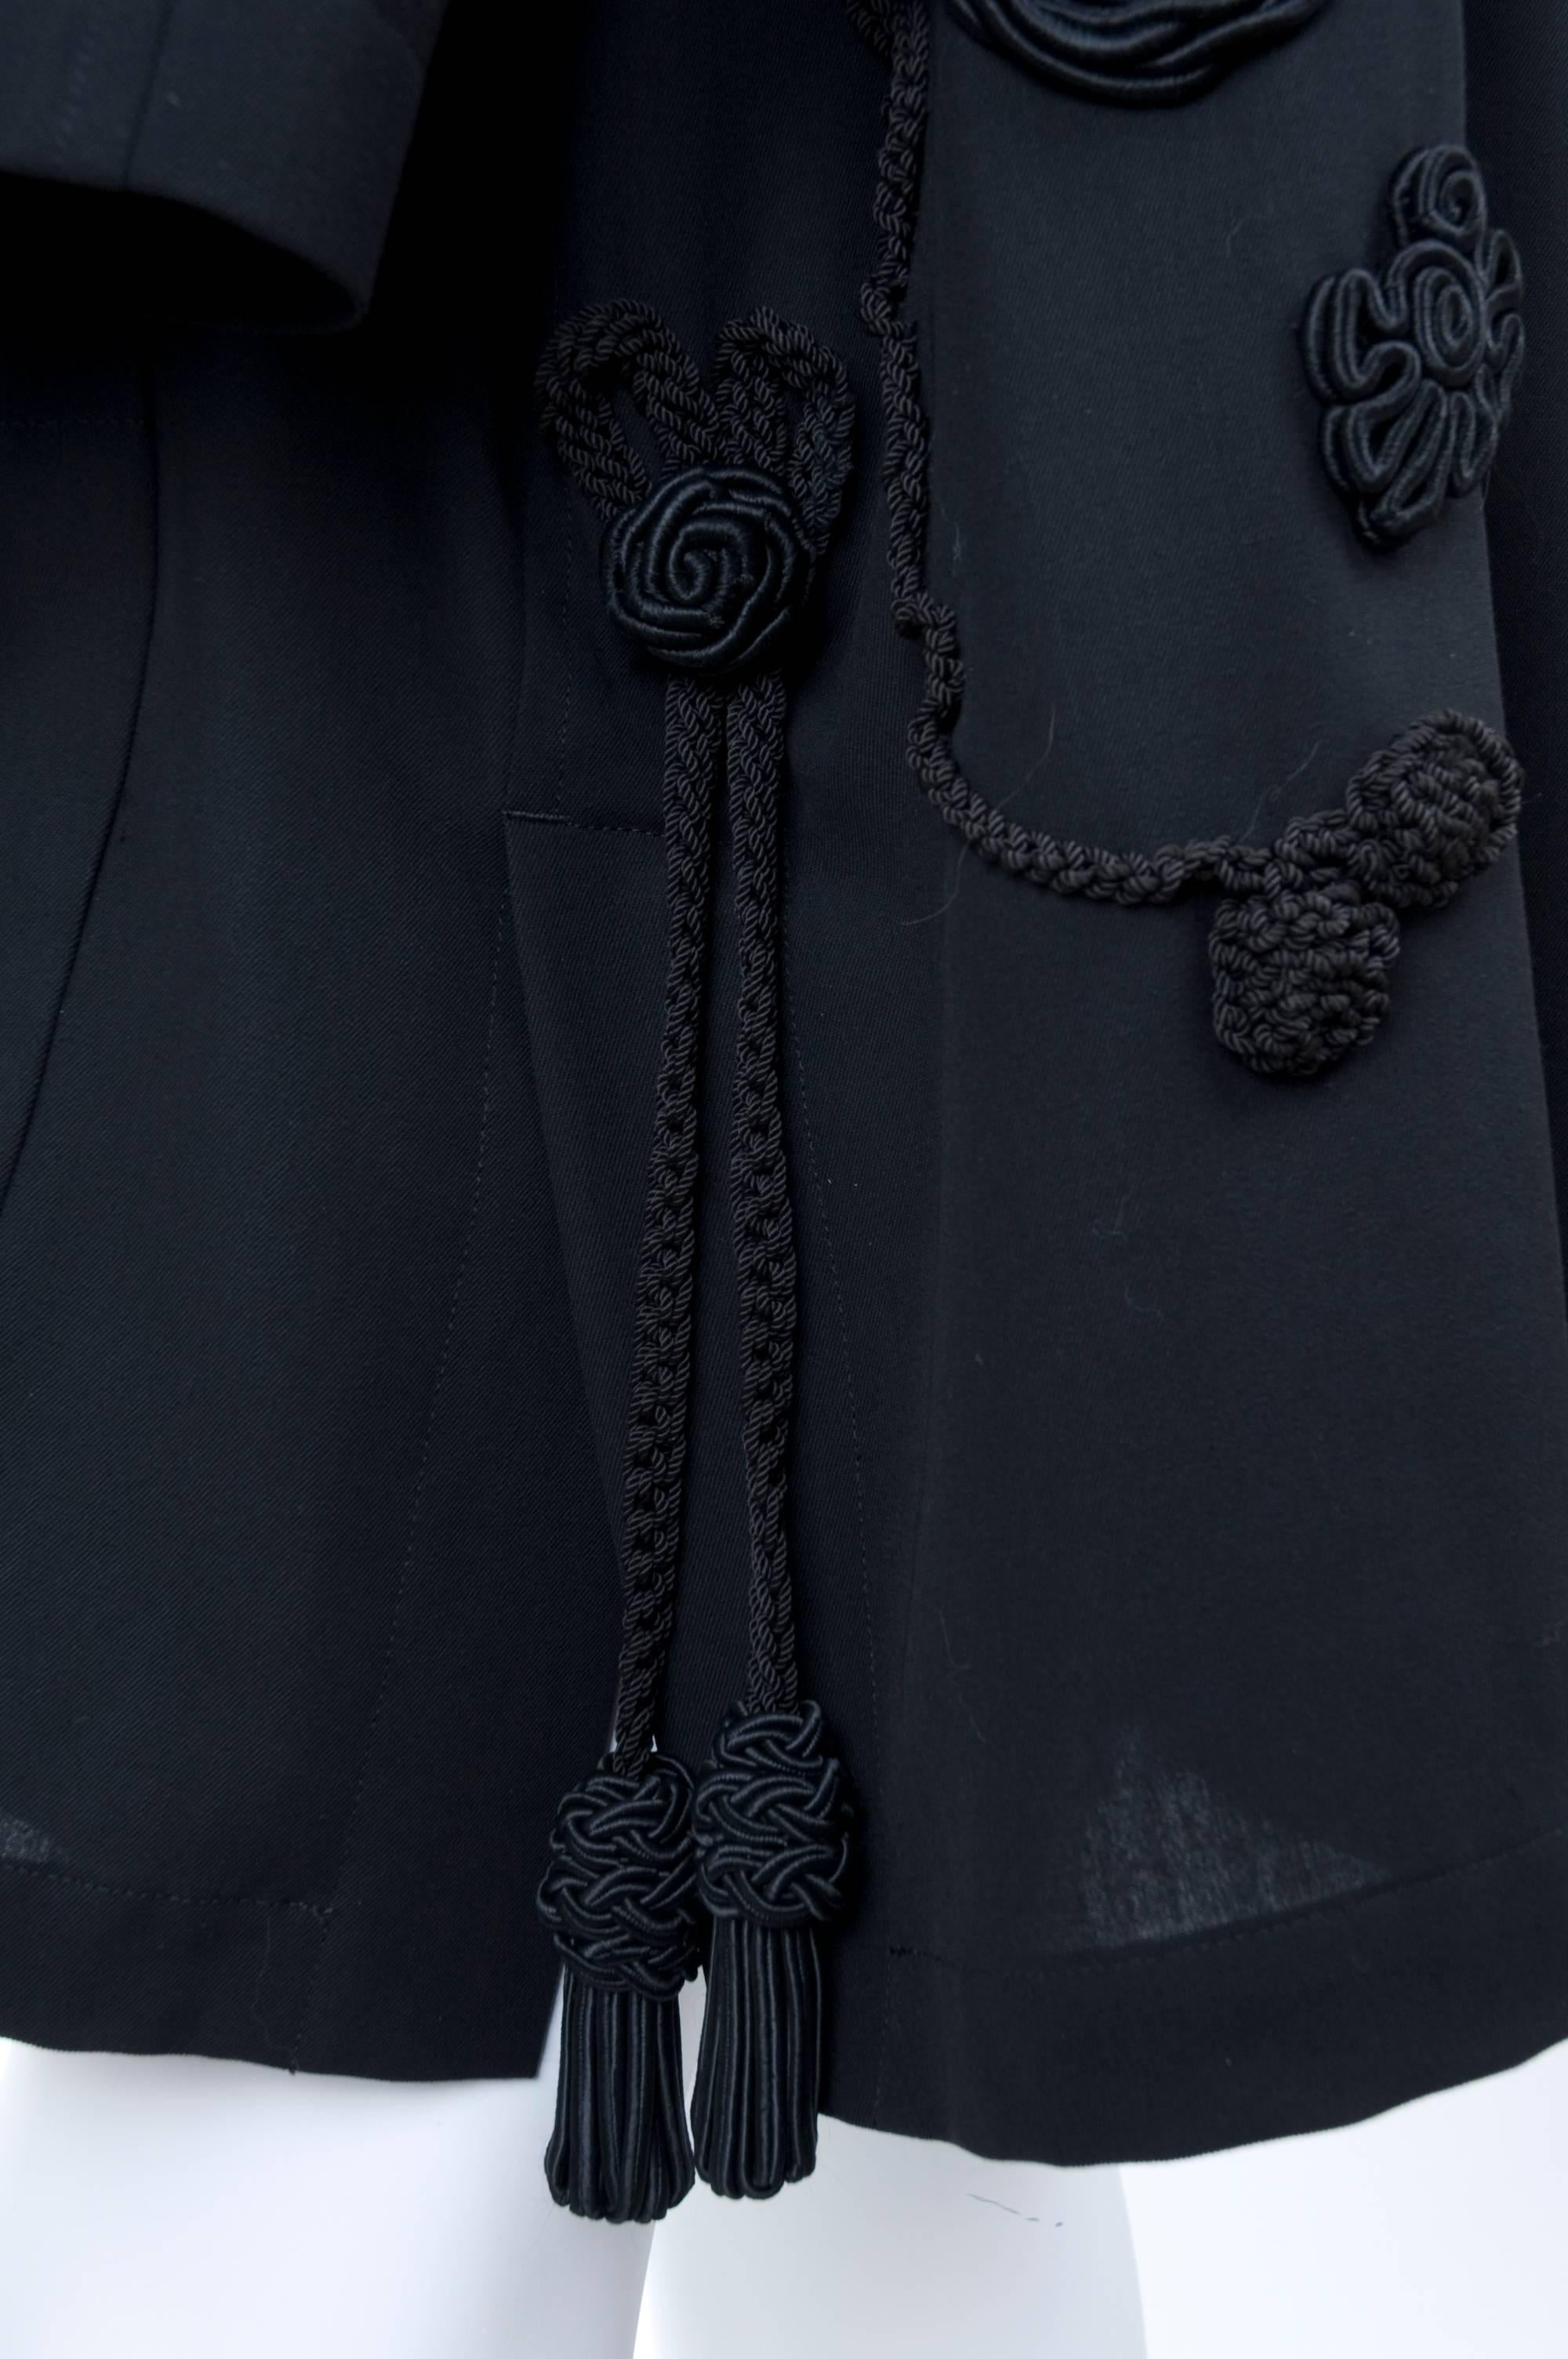 90's Yohji Yamamoto Black Coat with Corded Embroidery + Tassels Allover. For Sale 5